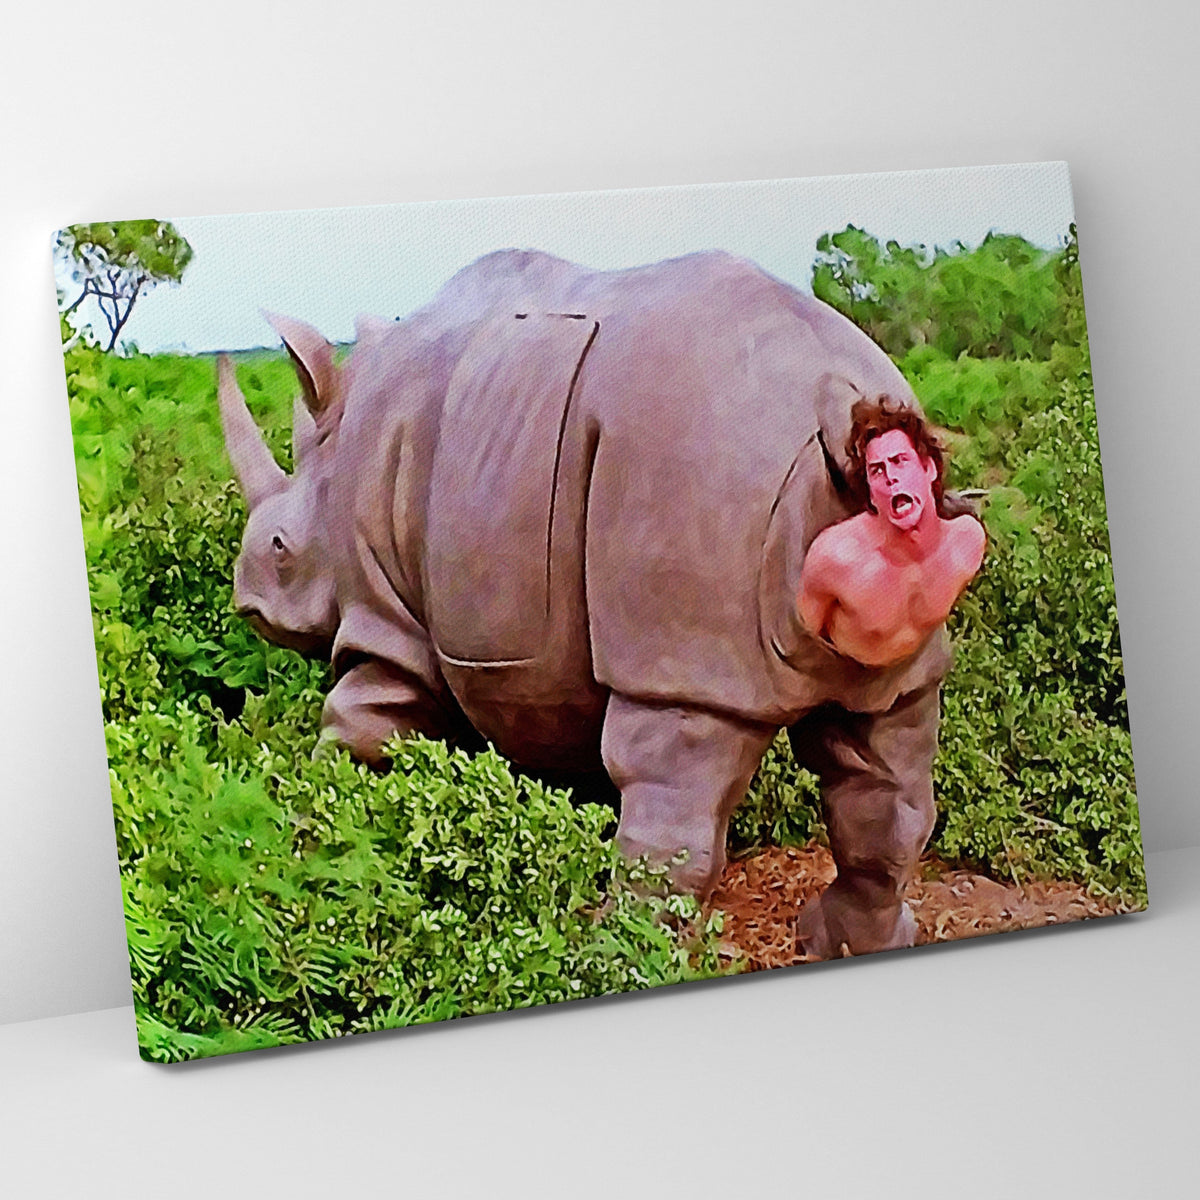 ace ventura and rhino- ace ventura pet detective|canvas |Everything Wall Art